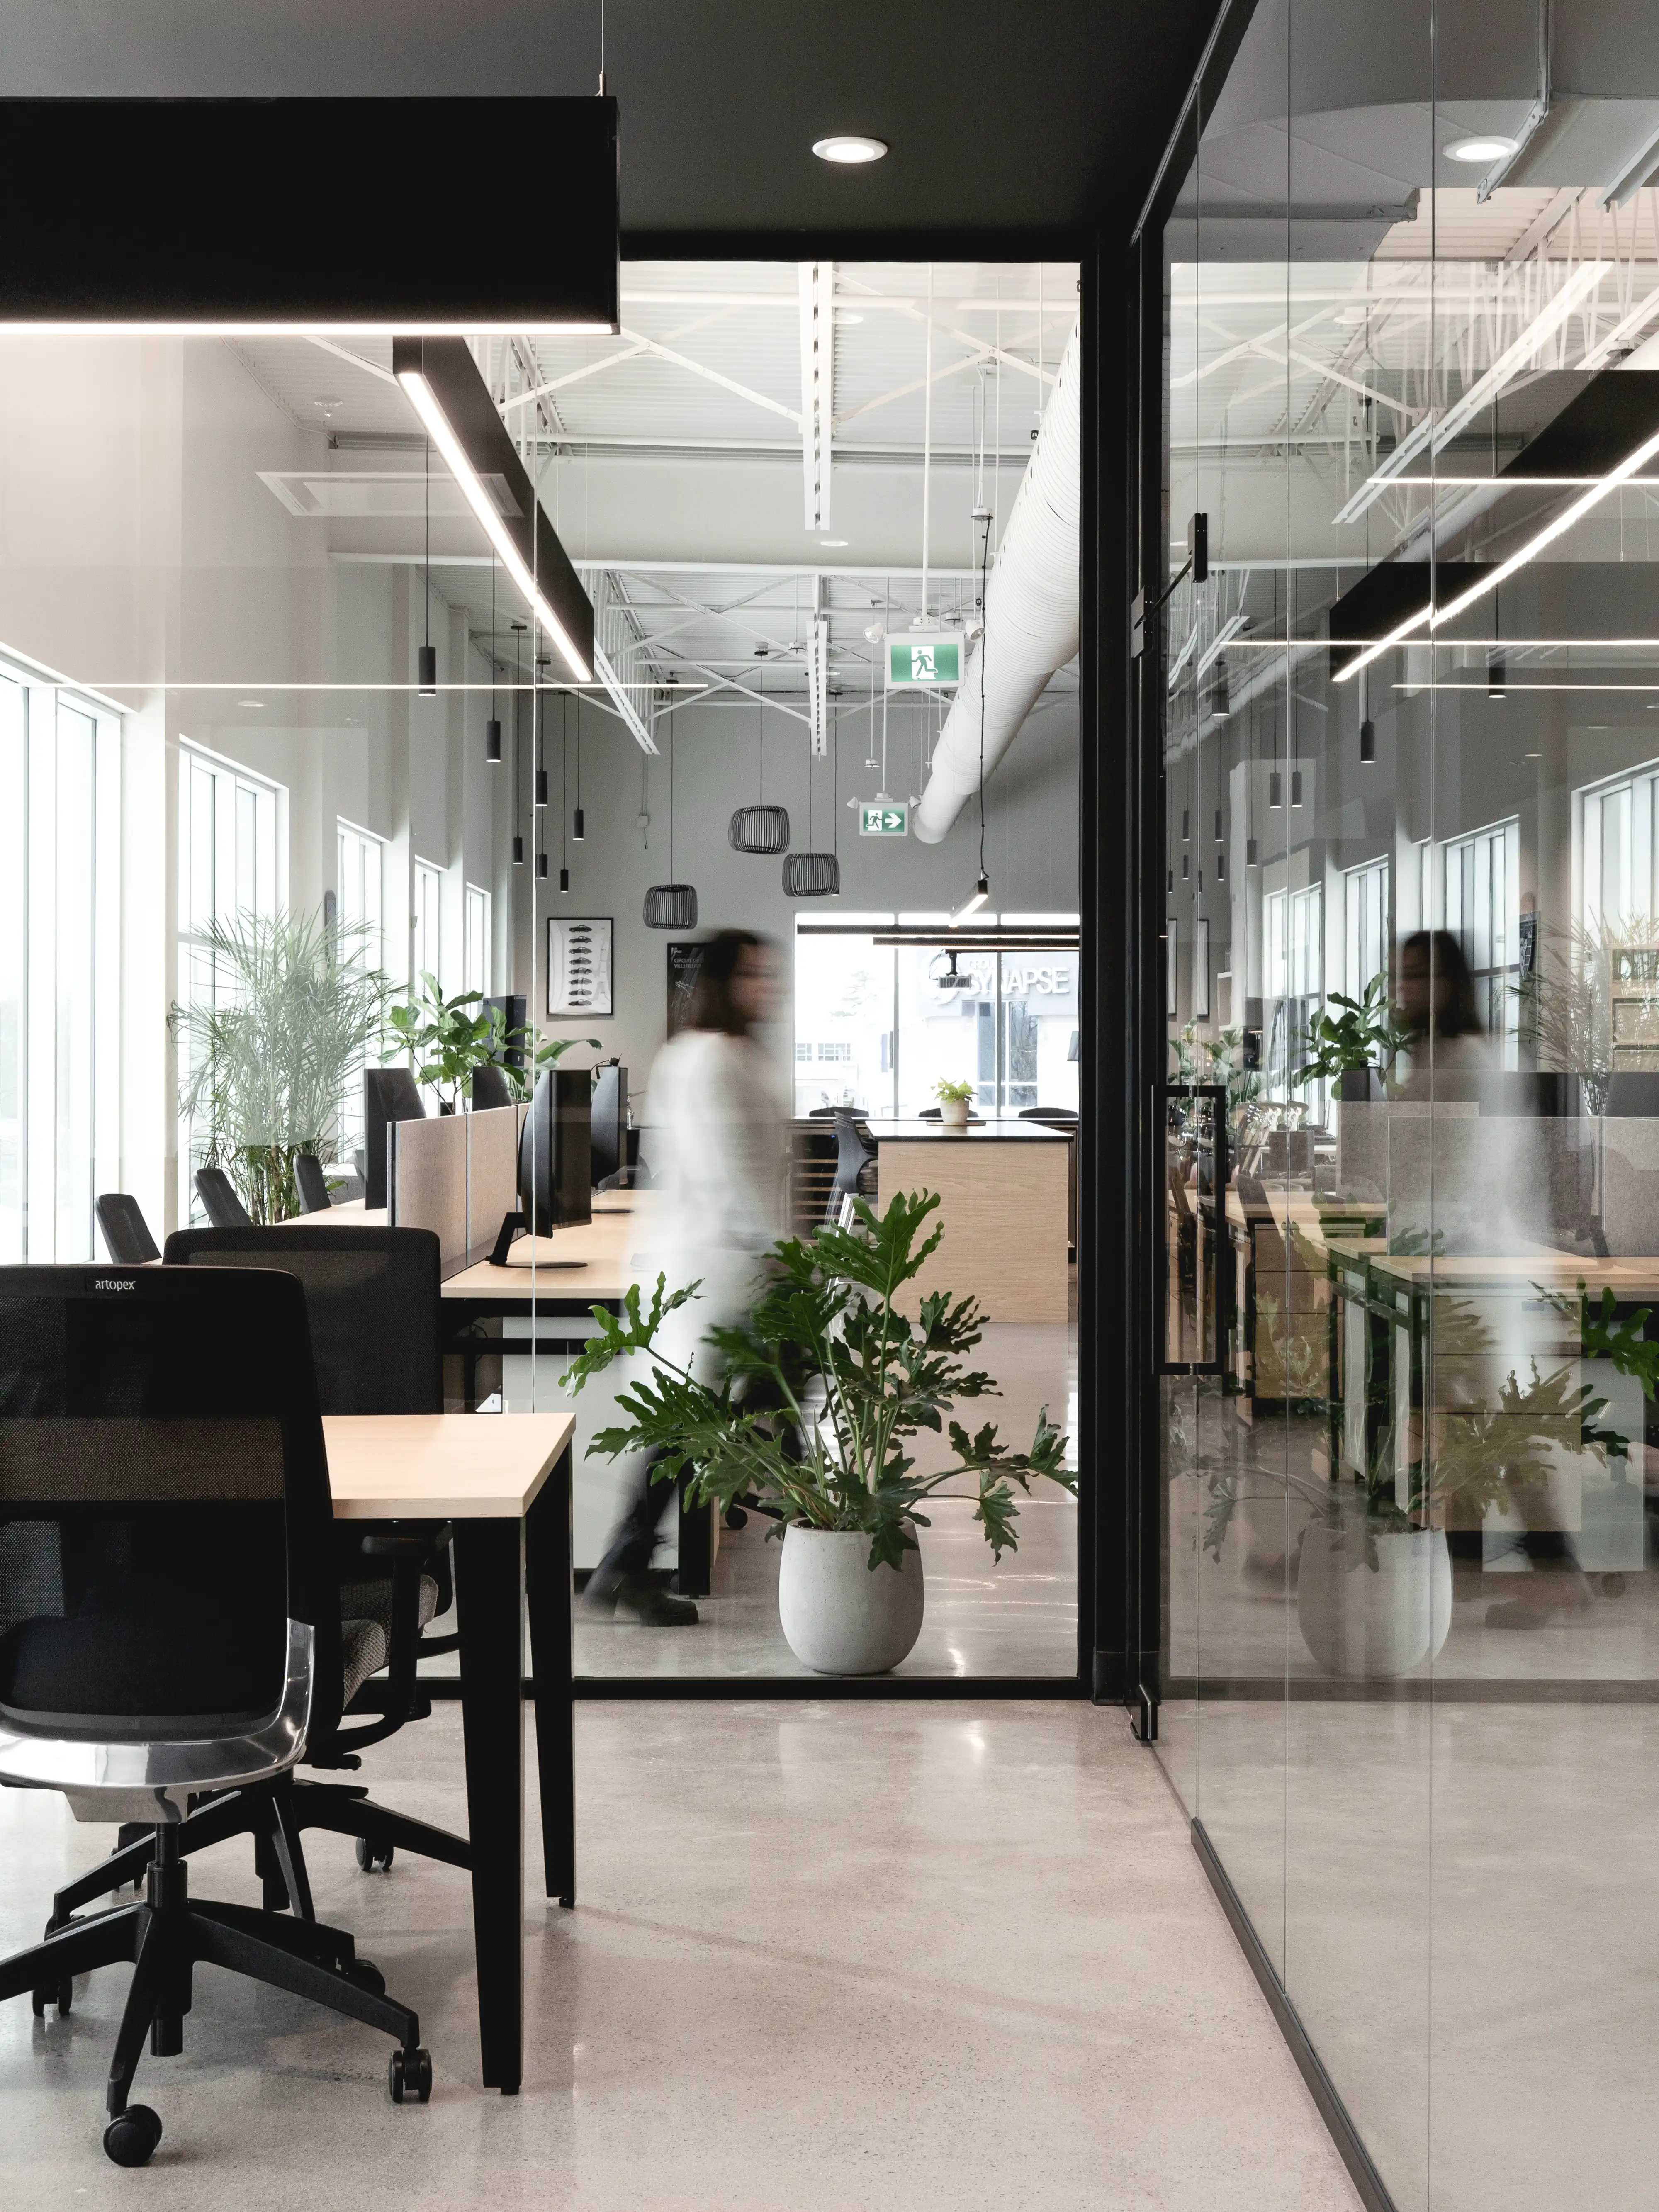 A modern office space with black and white color scheme, large windows, workstations, plants and a glass wall, interior by Sarah Brown Design